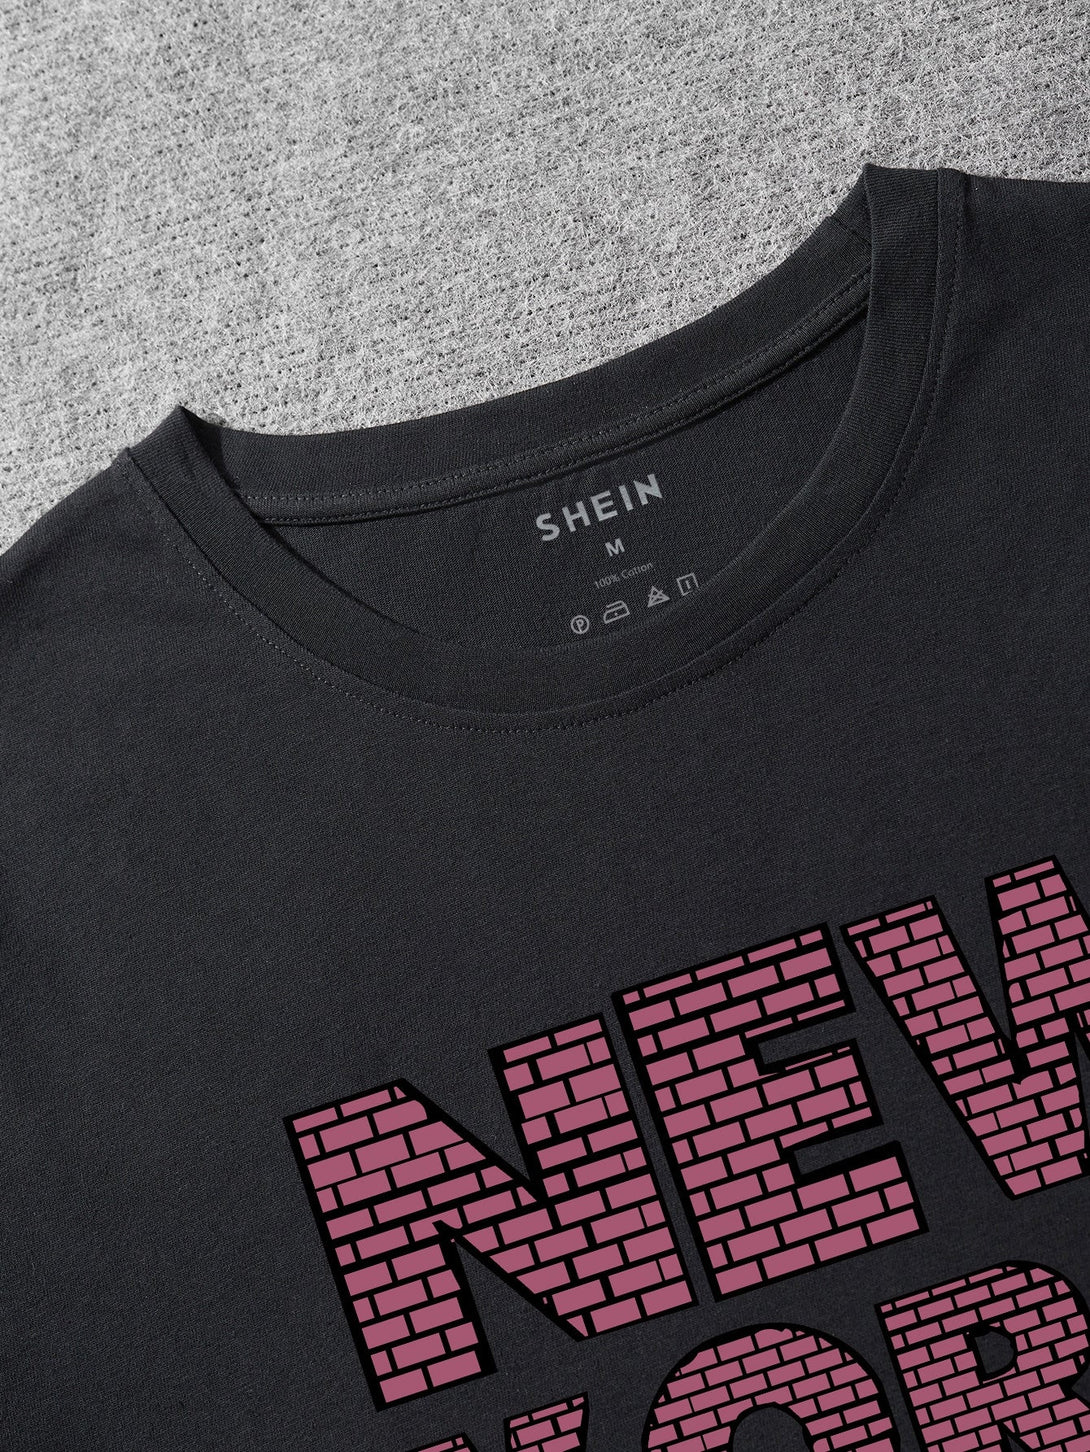 SHEIN New York Letter Graphic Tee - Negative Apparel